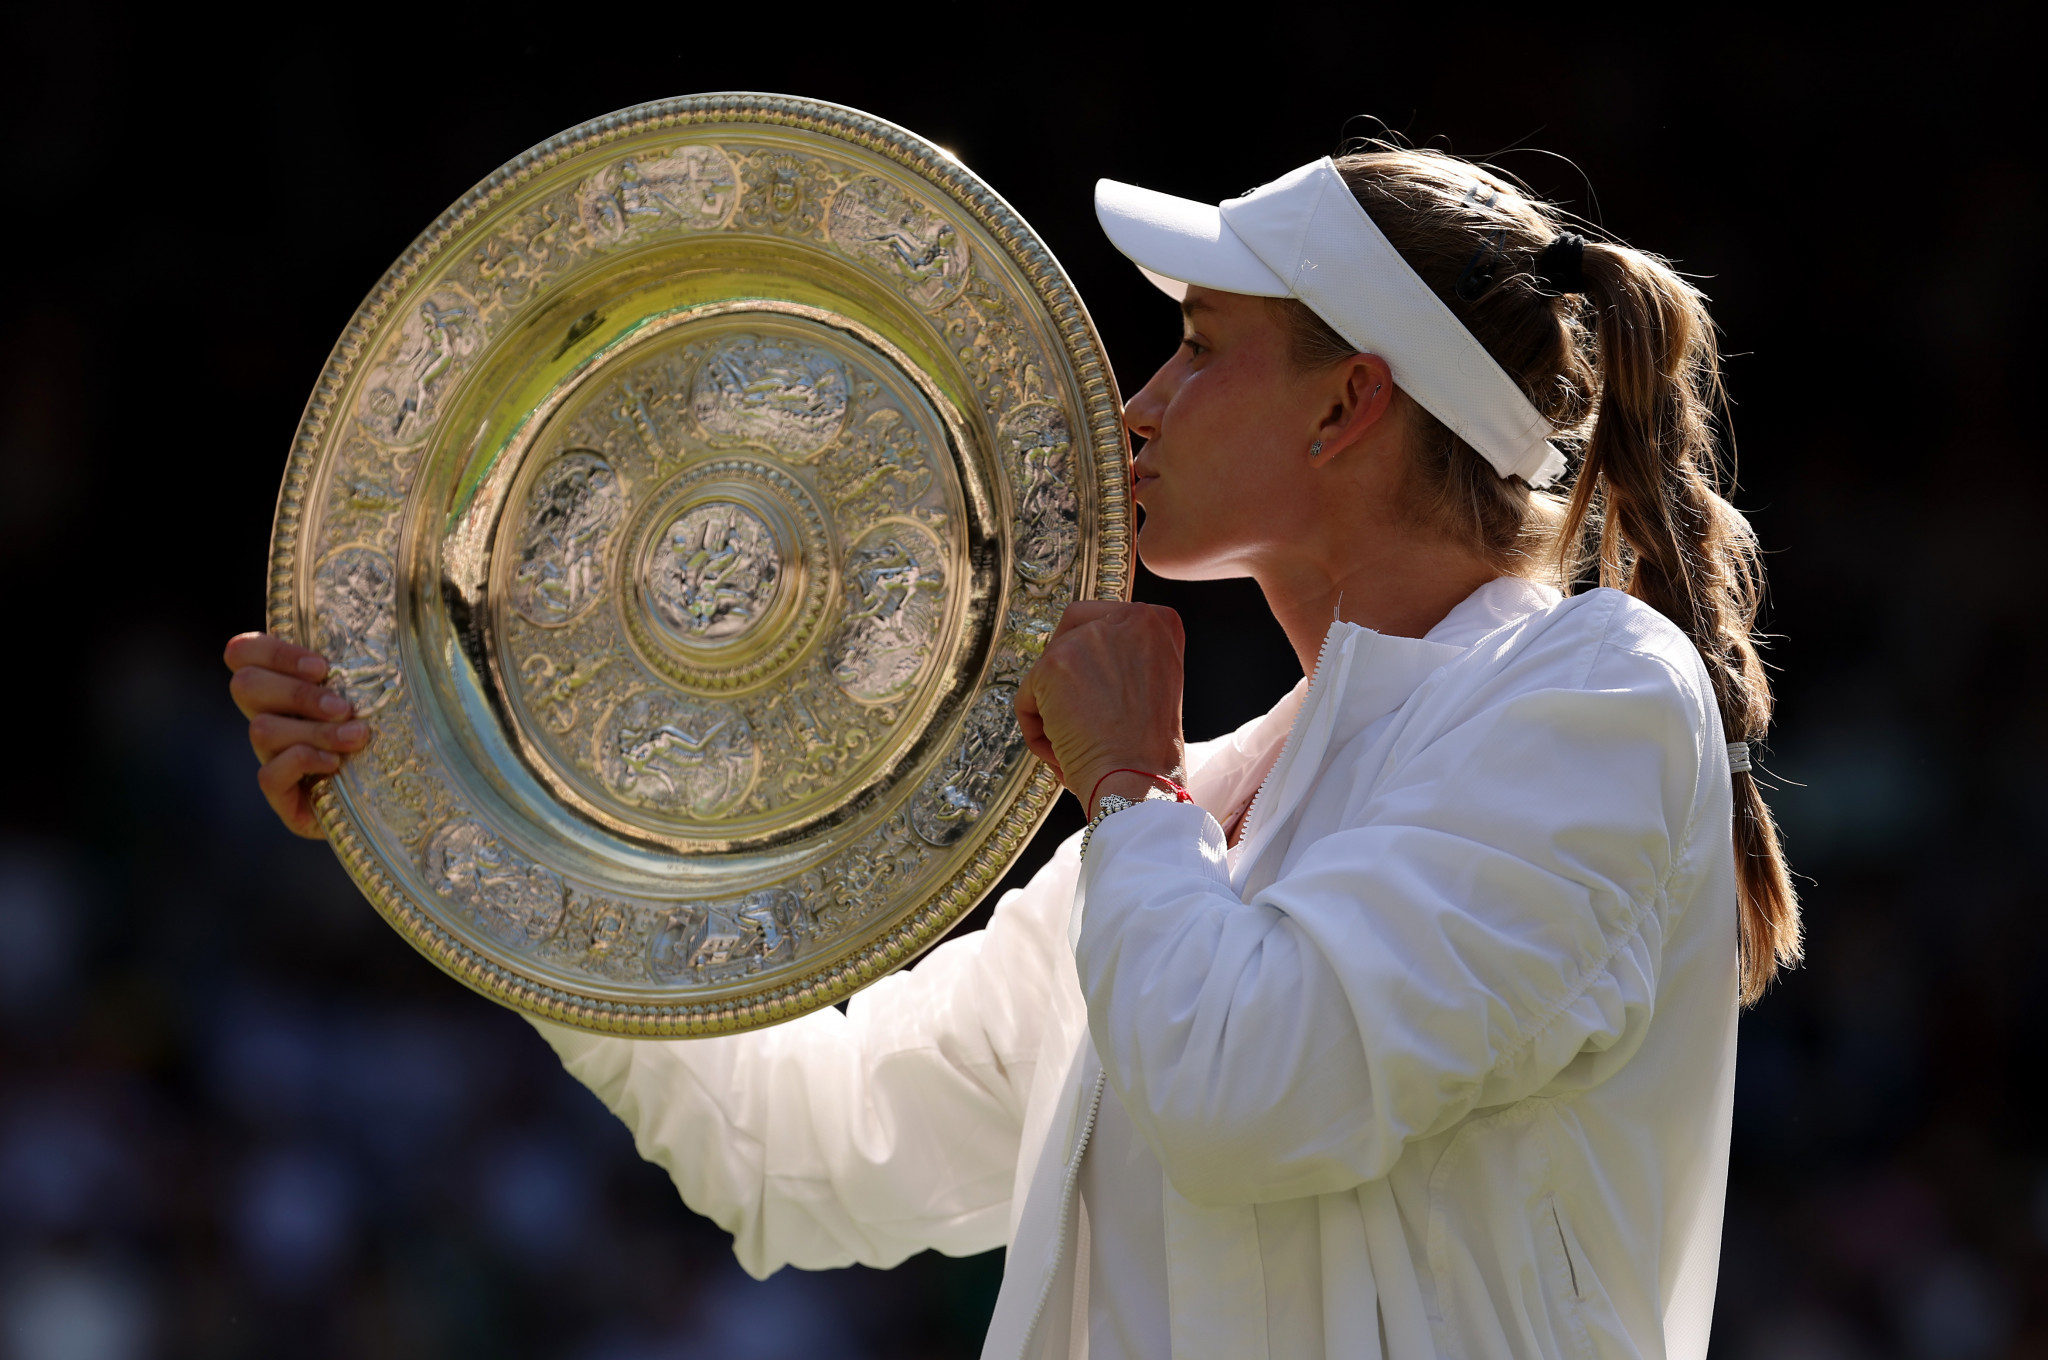 Elena Rybakina kissing her trophy, the Venus Rosewater Dish ©Getty Images